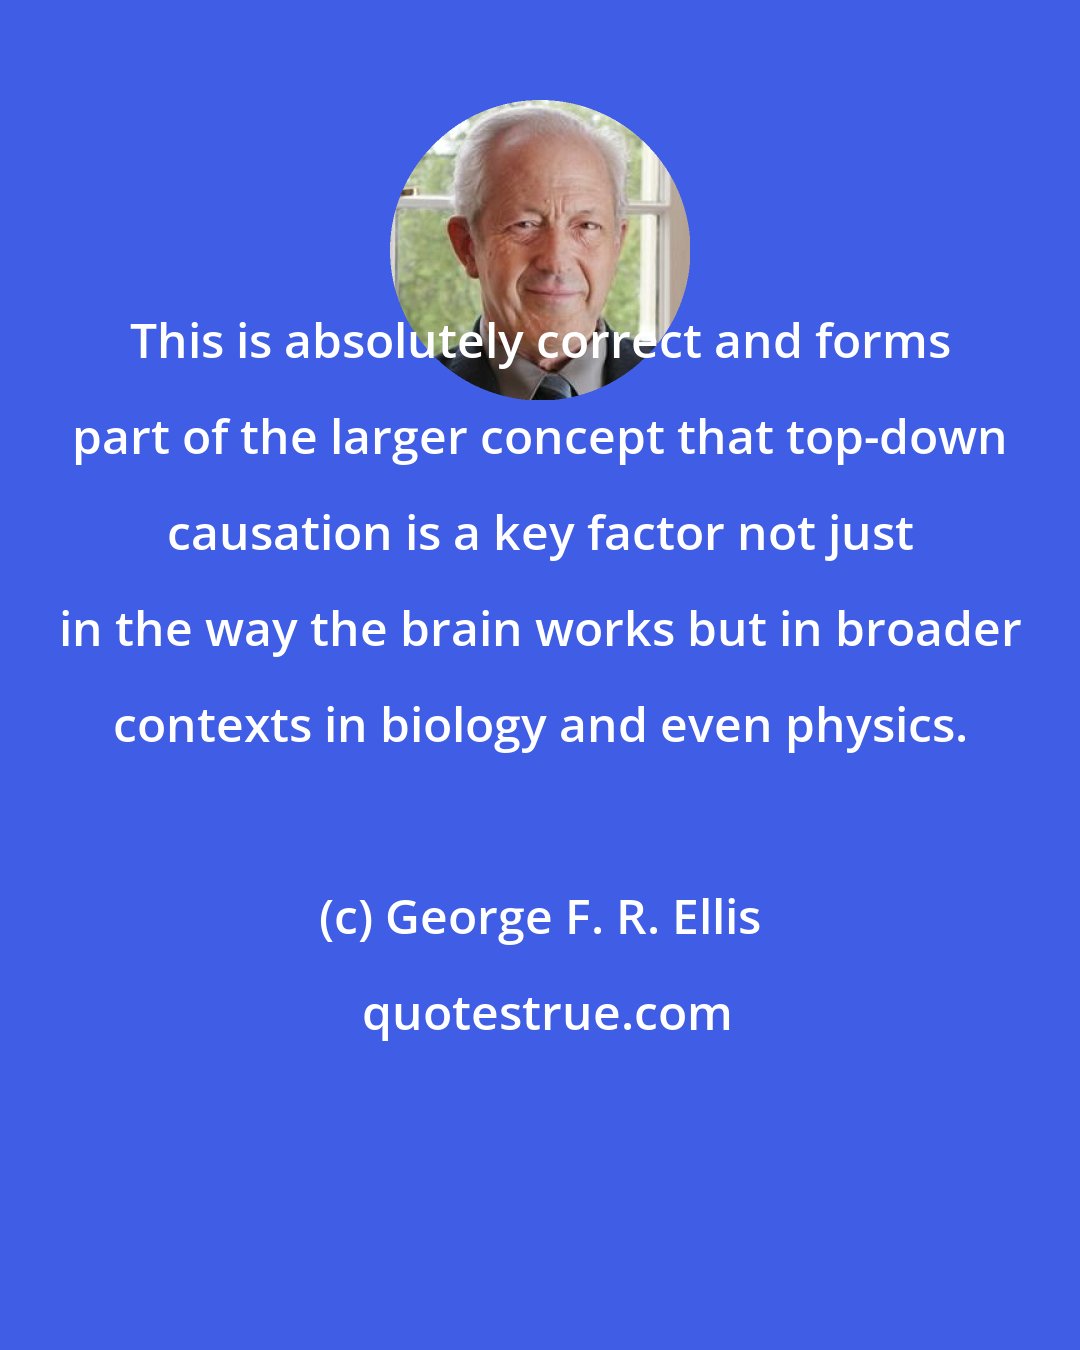 George F. R. Ellis: This is absolutely correct and forms part of the larger concept that top-down causation is a key factor not just in the way the brain works but in broader contexts in biology and even physics.